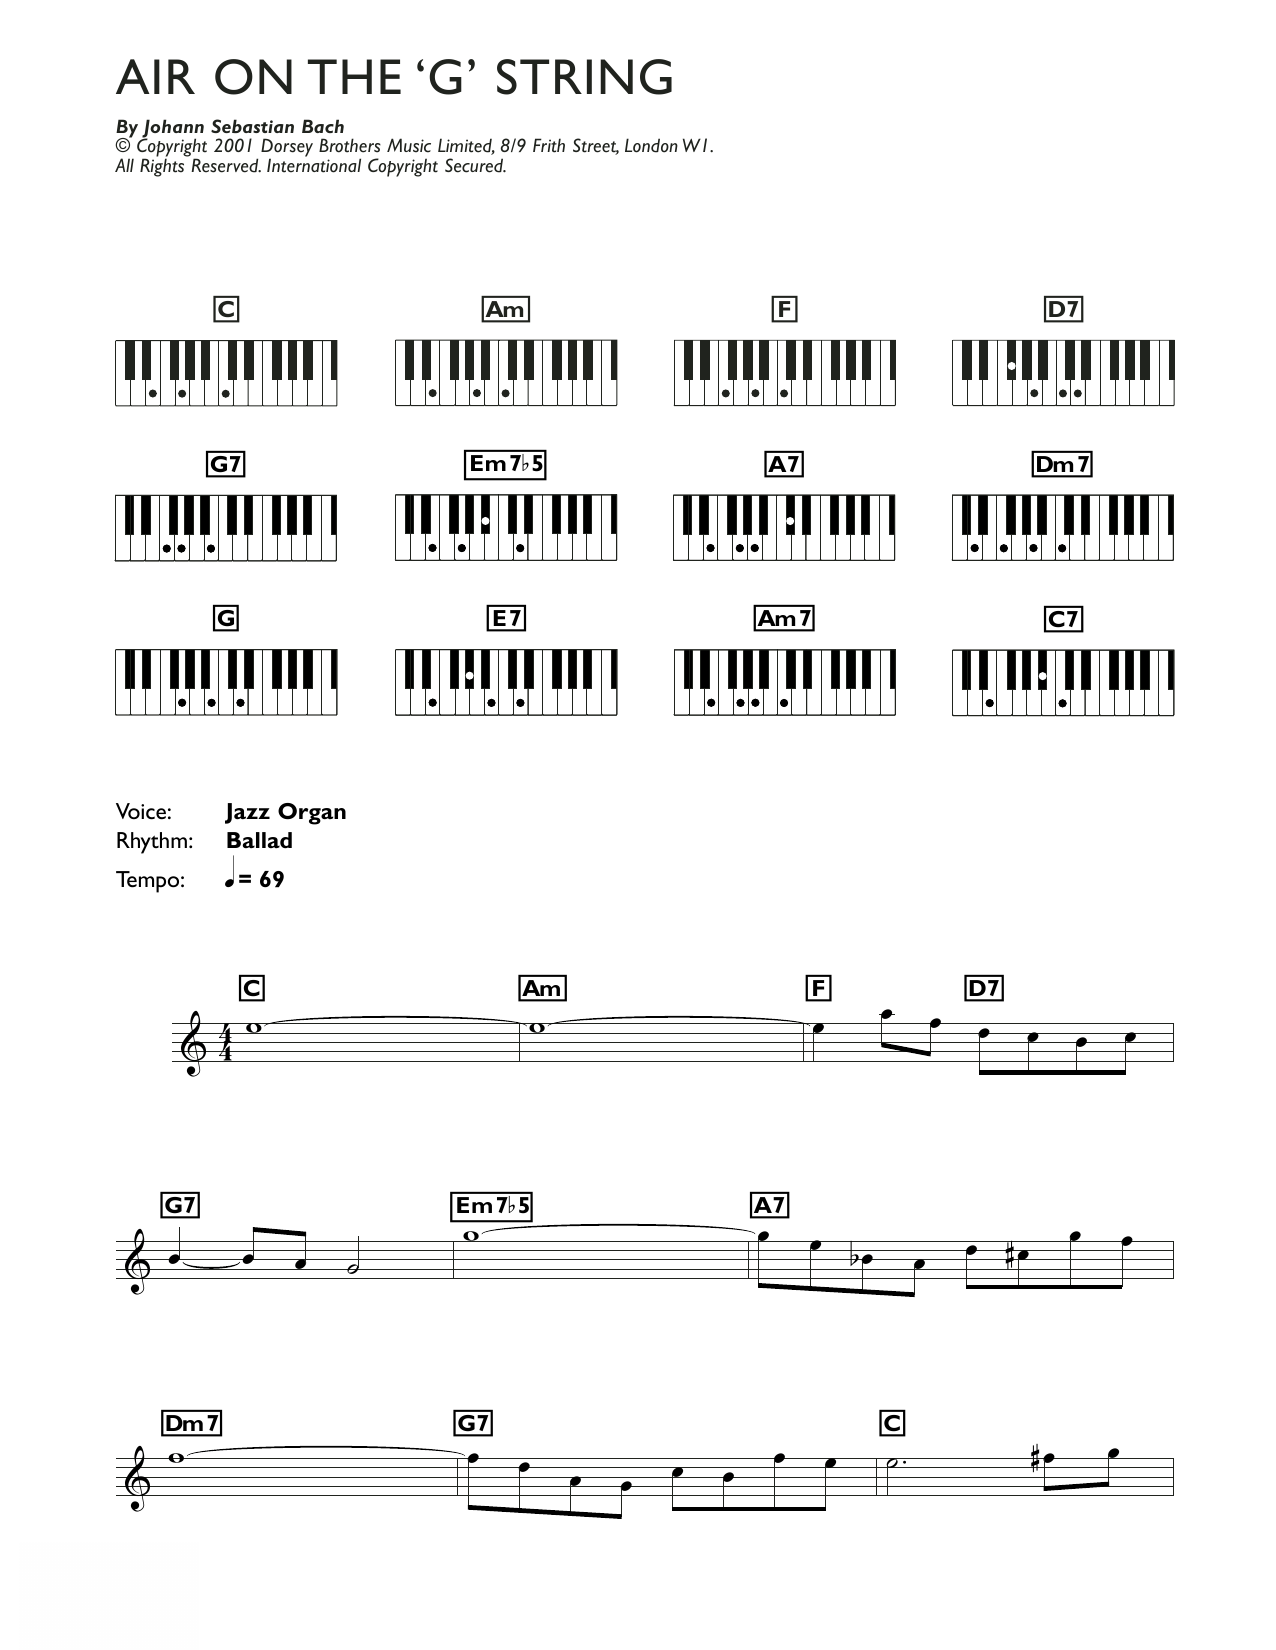 Download Johann Sebastian Bach Air On The G String (from Suite No.3 in Sheet Music